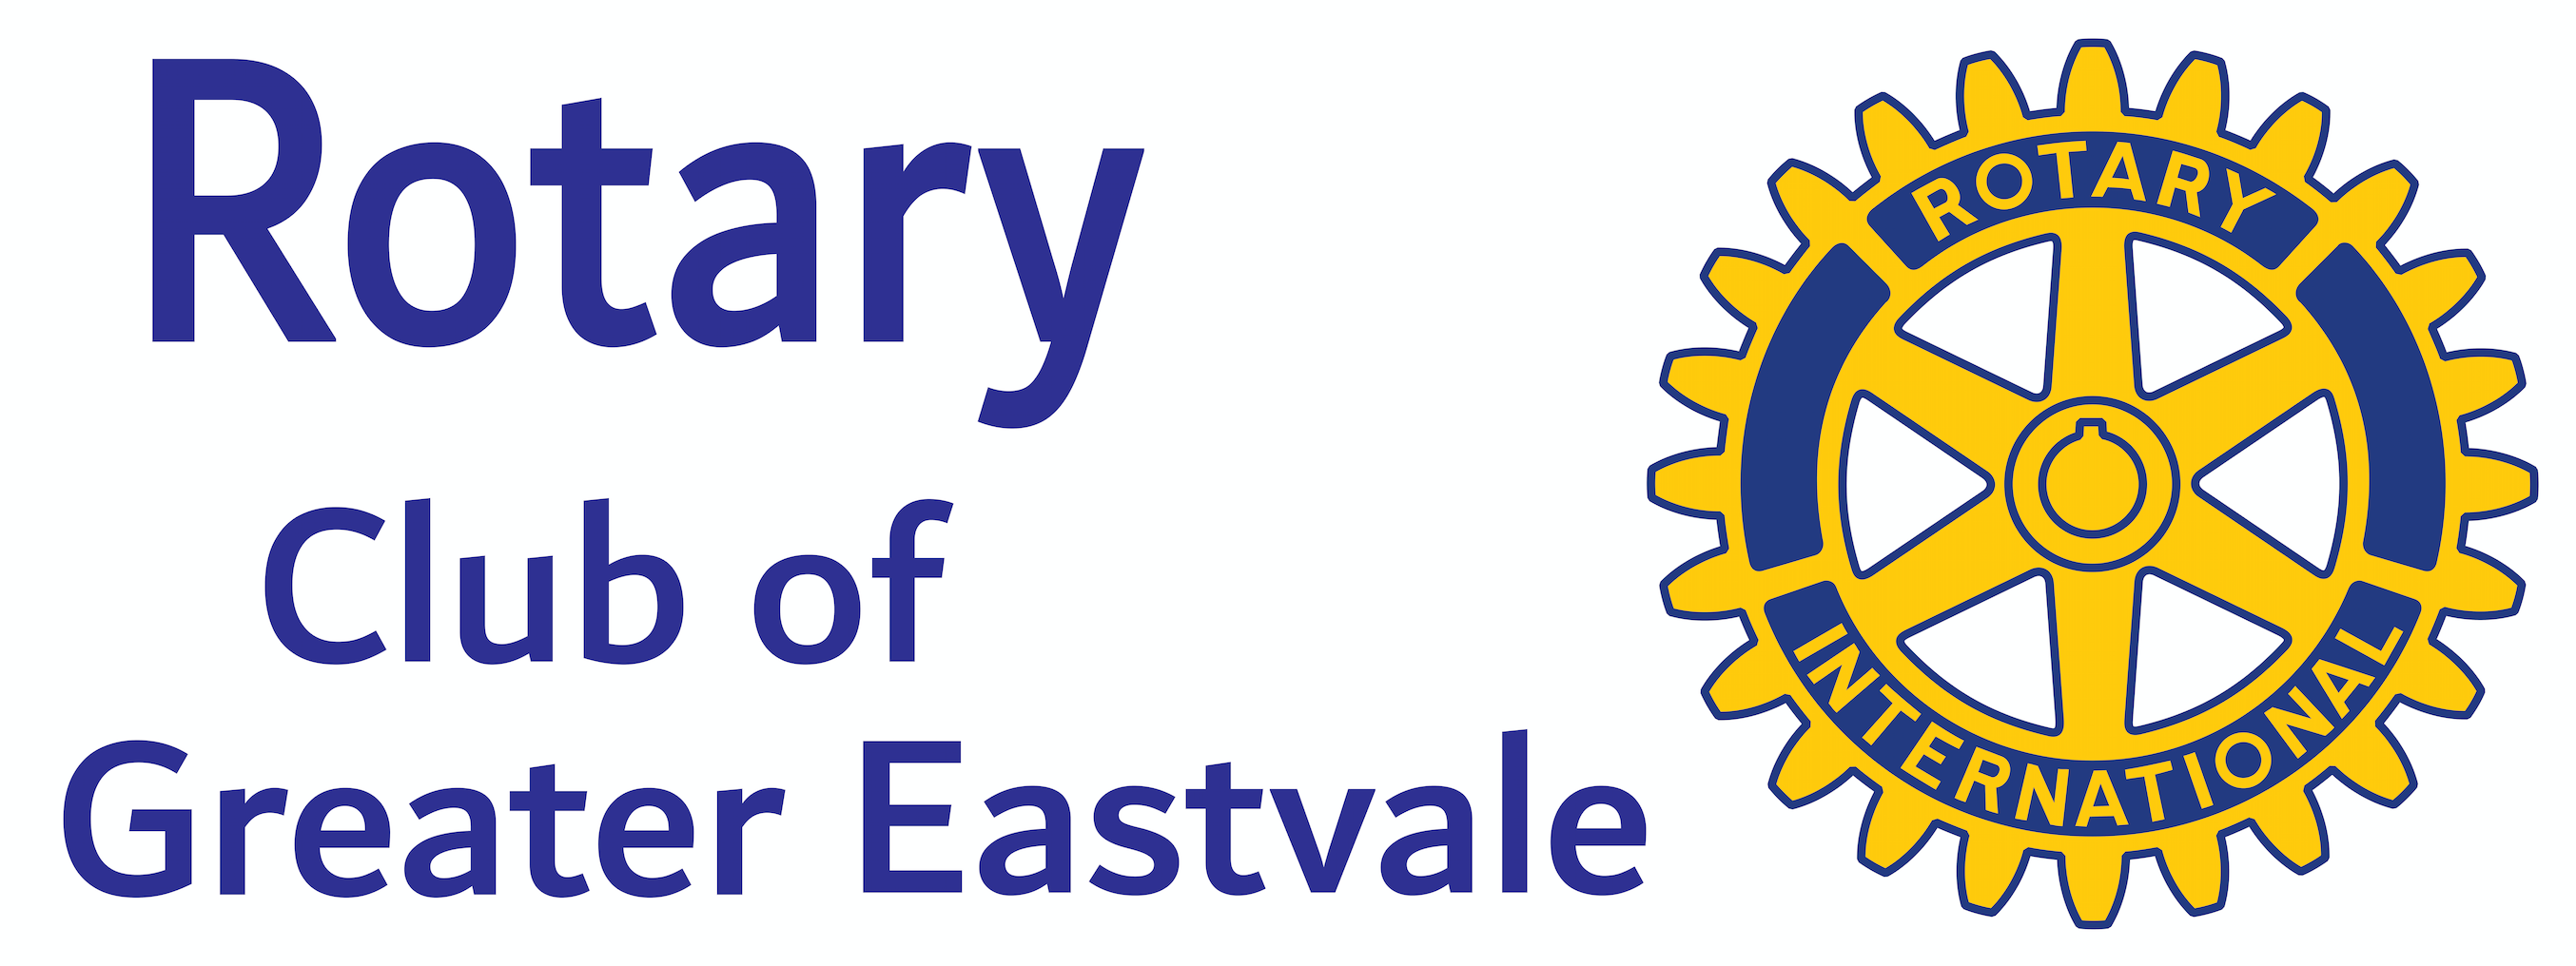 Rotary Club of Greater Eastvale logo